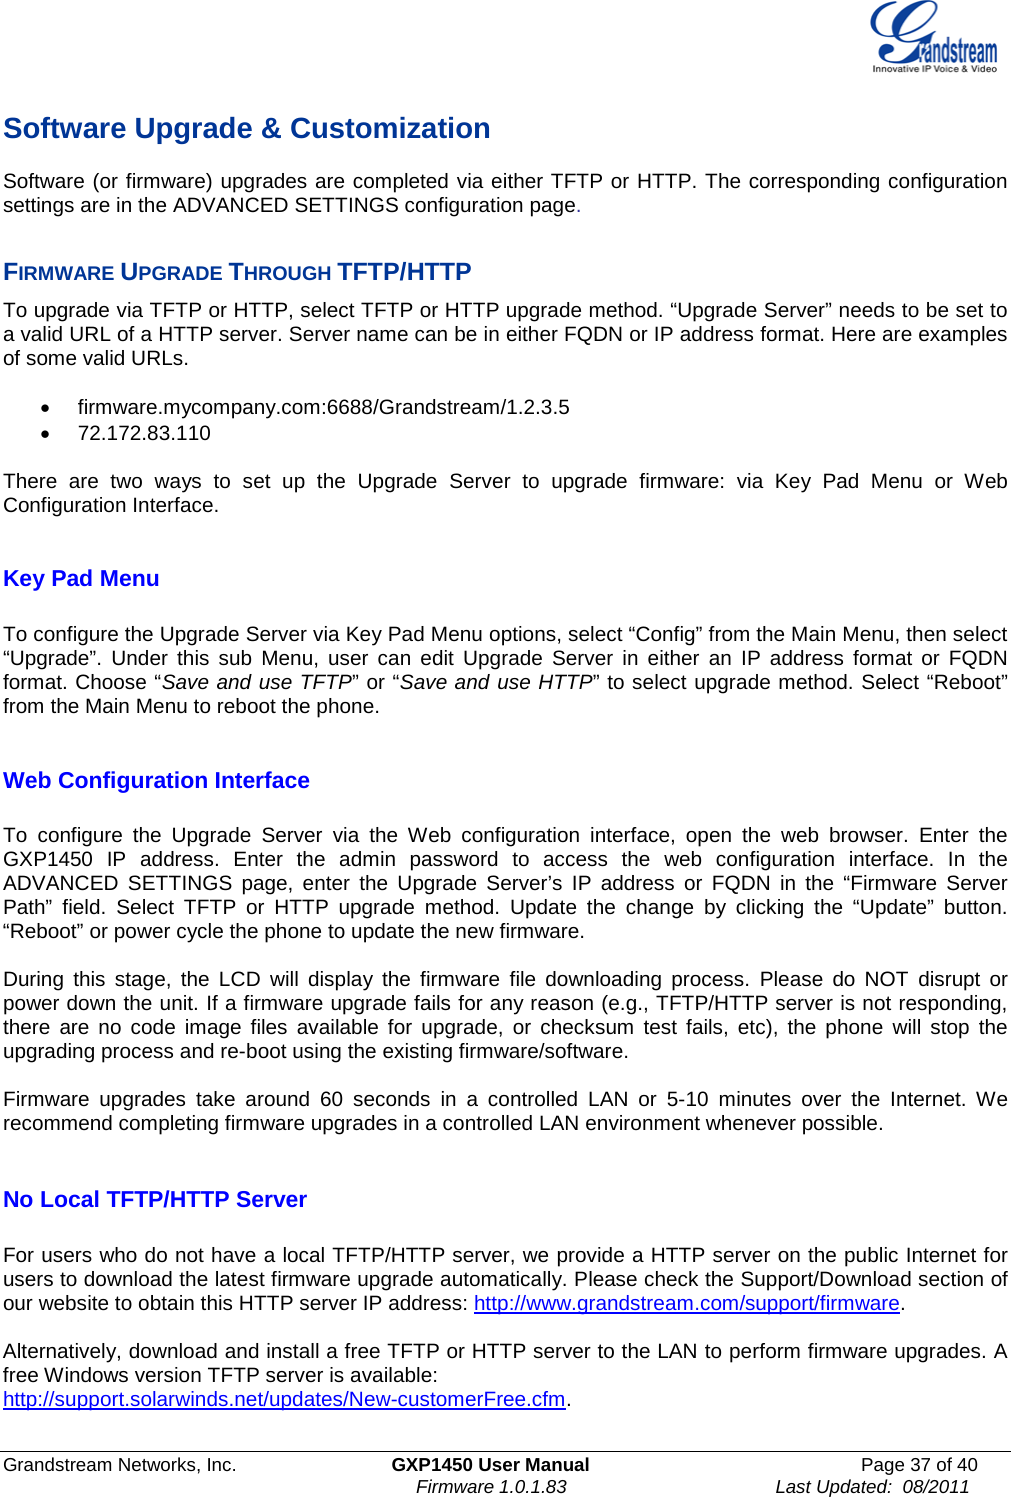  Grandstream Networks, Inc. GXP1450 User Manual Page 37 of 40                                                                         Firmware 1.0.1.83                                        Last Updated:  08/2011  Software Upgrade &amp; Customization Software (or firmware) upgrades are completed via either TFTP or HTTP. The corresponding configuration settings are in the ADVANCED SETTINGS configuration page.   FIRMWARE UPGRADE THROUGH TFTP/HTTP To upgrade via TFTP or HTTP, select TFTP or HTTP upgrade method. “Upgrade Server” needs to be set to a valid URL of a HTTP server. Server name can be in either FQDN or IP address format. Here are examples of some valid URLs.   • firmware.mycompany.com:6688/Grandstream/1.2.3.5 • 72.172.83.110    There are two ways to set up the Upgrade Server to upgrade firmware: via Key Pad Menu or Web Configuration Interface.  Key Pad Menu        To configure the Upgrade Server via Key Pad Menu options, select “Config” from the Main Menu, then select “Upgrade”. Under this sub Menu, user can edit Upgrade Server in either an IP address format or FQDN format. Choose “Save and use TFTP” or “Save and use HTTP” to select upgrade method. Select “Reboot” from the Main Menu to reboot the phone.  Web Configuration Interface  To  configure the Upgrade Server via the Web configuration interface, open the web browser. Enter the GXP1450 IP address. Enter the admin password to access the web configuration interface. In the ADVANCED SETTINGS page, enter the Upgrade Server’s IP address or FQDN in the “Firmware Server Path” field. Select TFTP or HTTP upgrade method. Update the change by clicking the “Update” button. “Reboot” or power cycle the phone to update the new firmware.  During this stage, the LCD will display the firmware file downloading process. Please do NOT disrupt or power down the unit. If a firmware upgrade fails for any reason (e.g., TFTP/HTTP server is not responding, there are no code image files available for upgrade, or checksum test fails, etc), the phone will stop the upgrading process and re-boot using the existing firmware/software.  Firmware upgrades take around 60 seconds in a controlled LAN or 5-10 minutes over the Internet. We recommend completing firmware upgrades in a controlled LAN environment whenever possible.   No Local TFTP/HTTP Server  For users who do not have a local TFTP/HTTP server, we provide a HTTP server on the public Internet for users to download the latest firmware upgrade automatically. Please check the Support/Download section of our website to obtain this HTTP server IP address: http://www.grandstream.com/support/firmware.  Alternatively, download and install a free TFTP or HTTP server to the LAN to perform firmware upgrades. A free Windows version TFTP server is available:   http://support.solarwinds.net/updates/New-customerFree.cfm.  